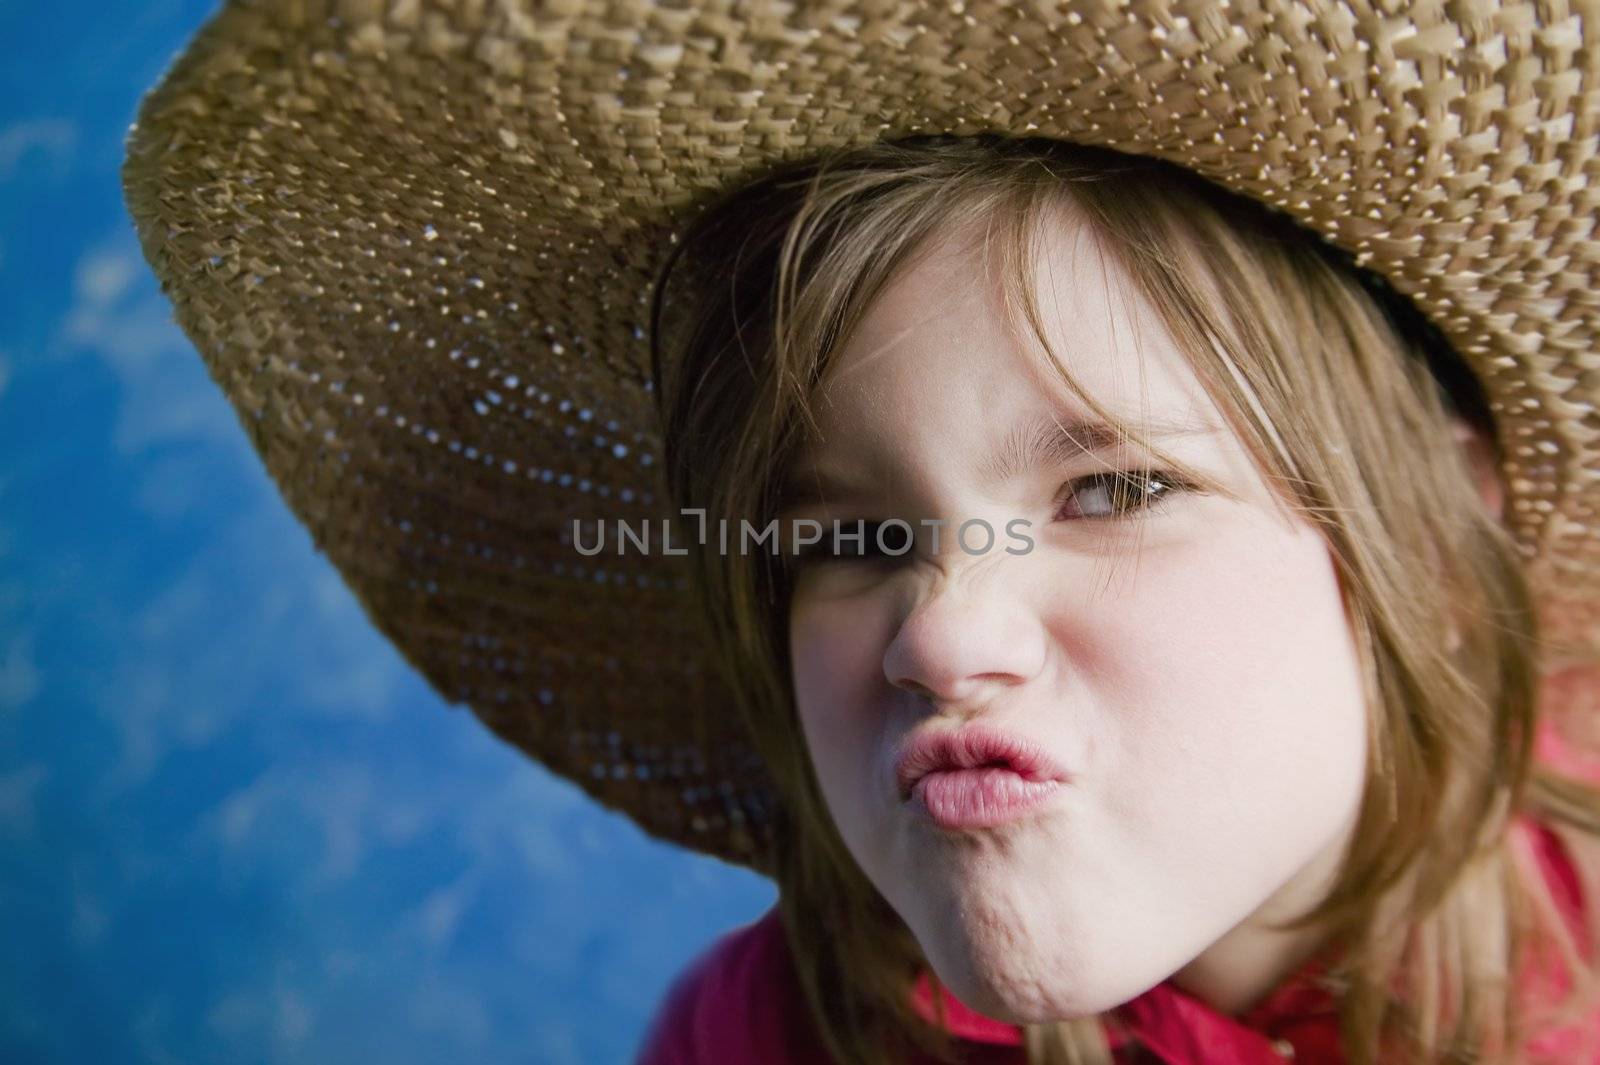 Little girl wearing a straw cowboy hat makes a funny face